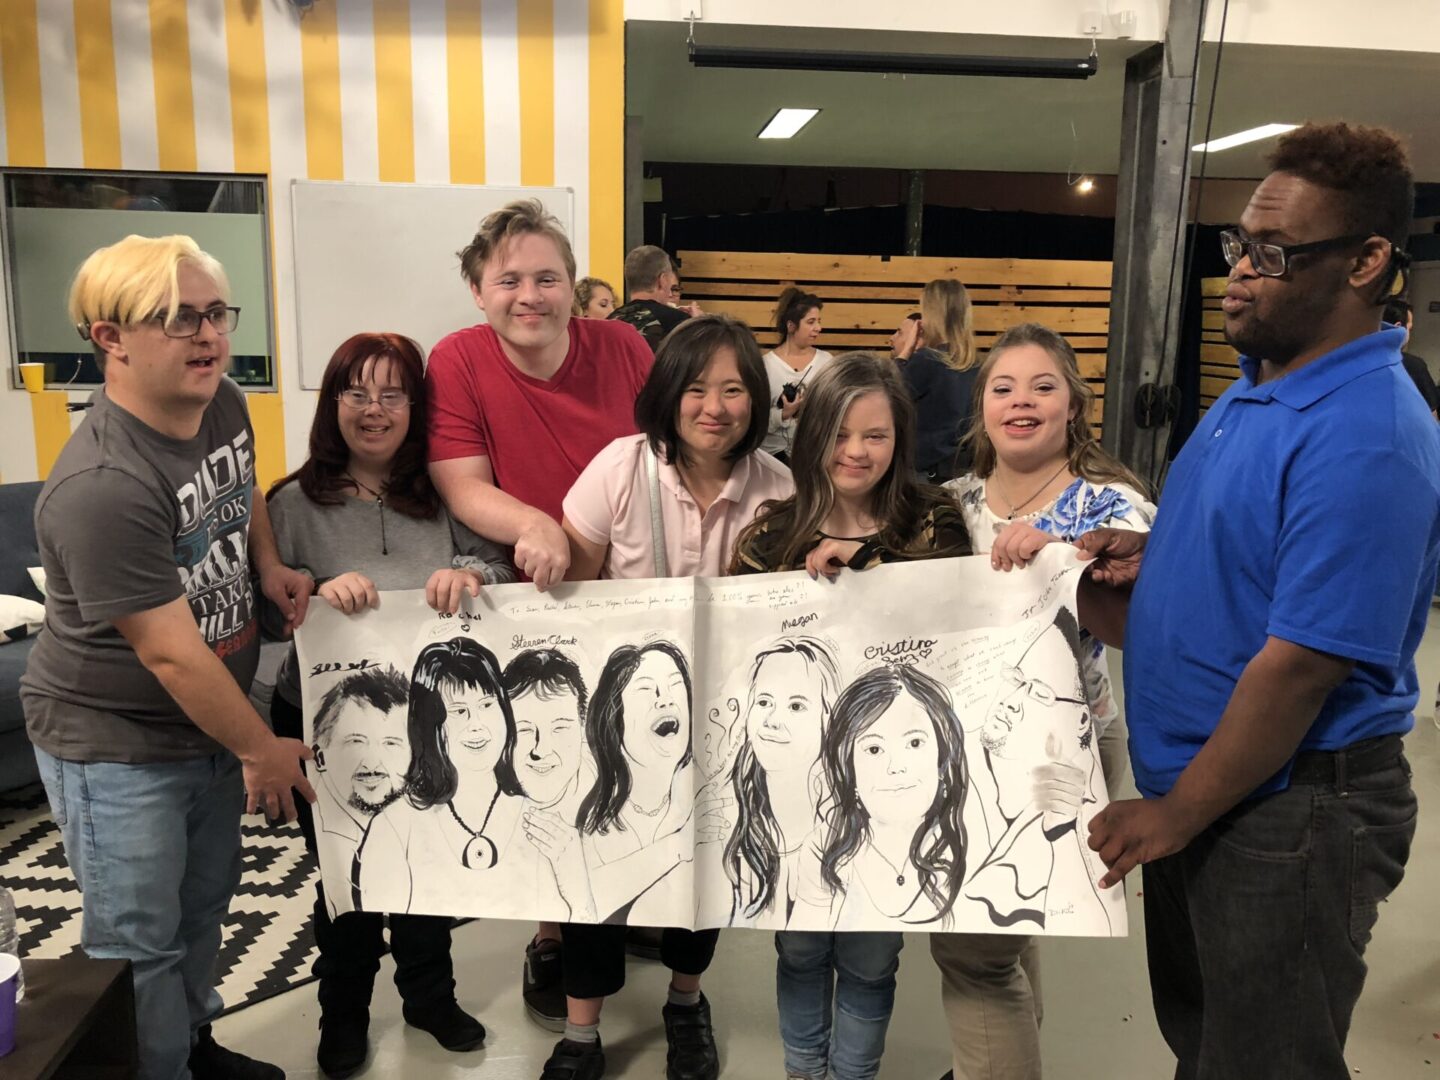 A group of people holding up two large drawings.